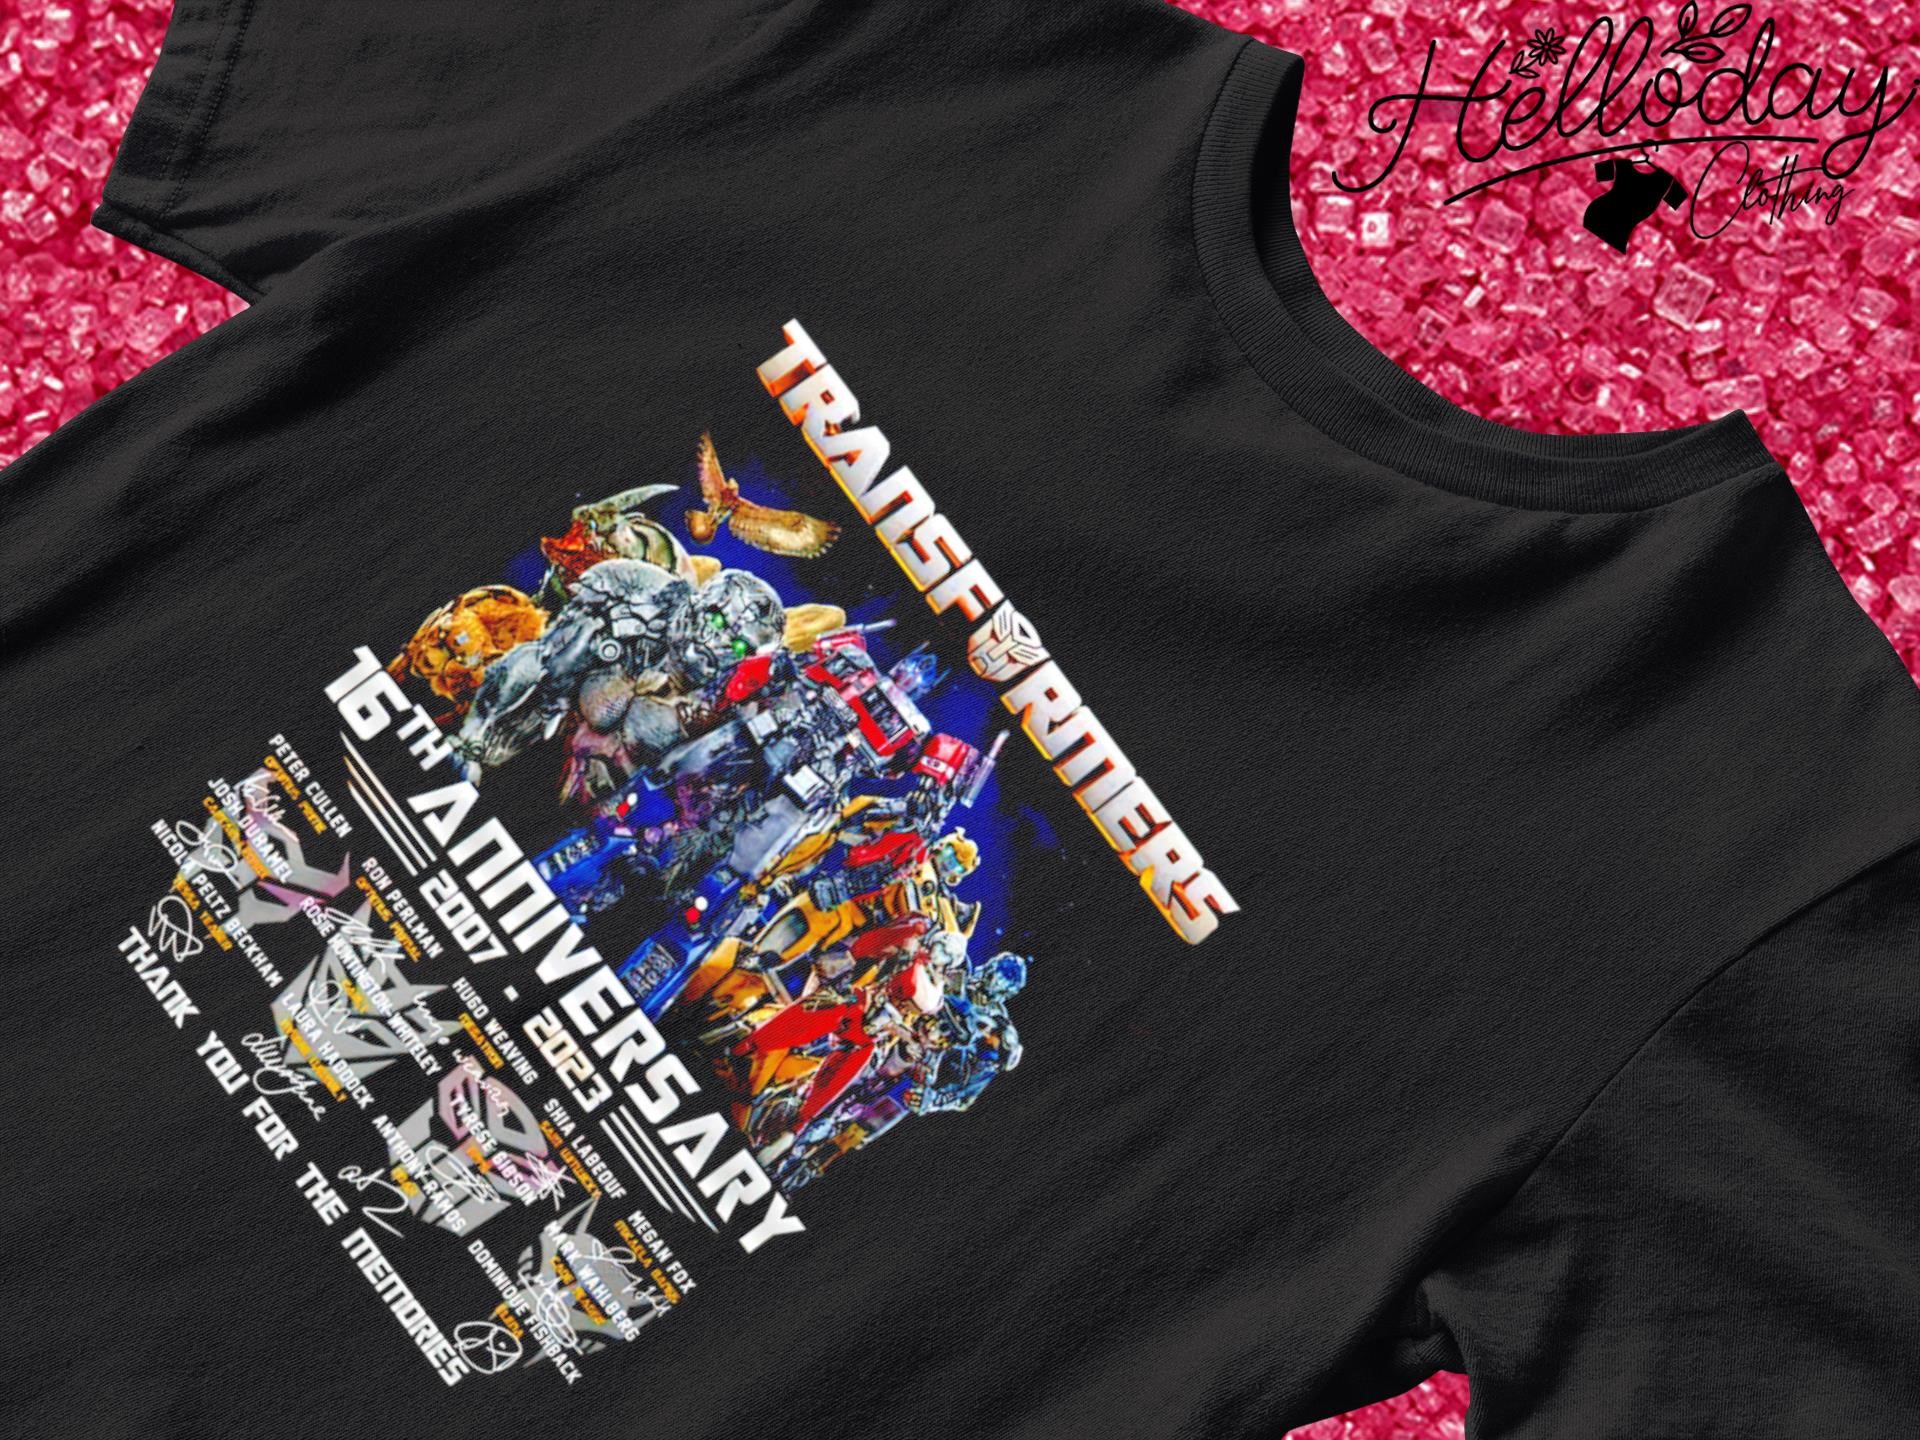 Transformers 16th anniversary 2007-2023 thank you for the memories signature shirt